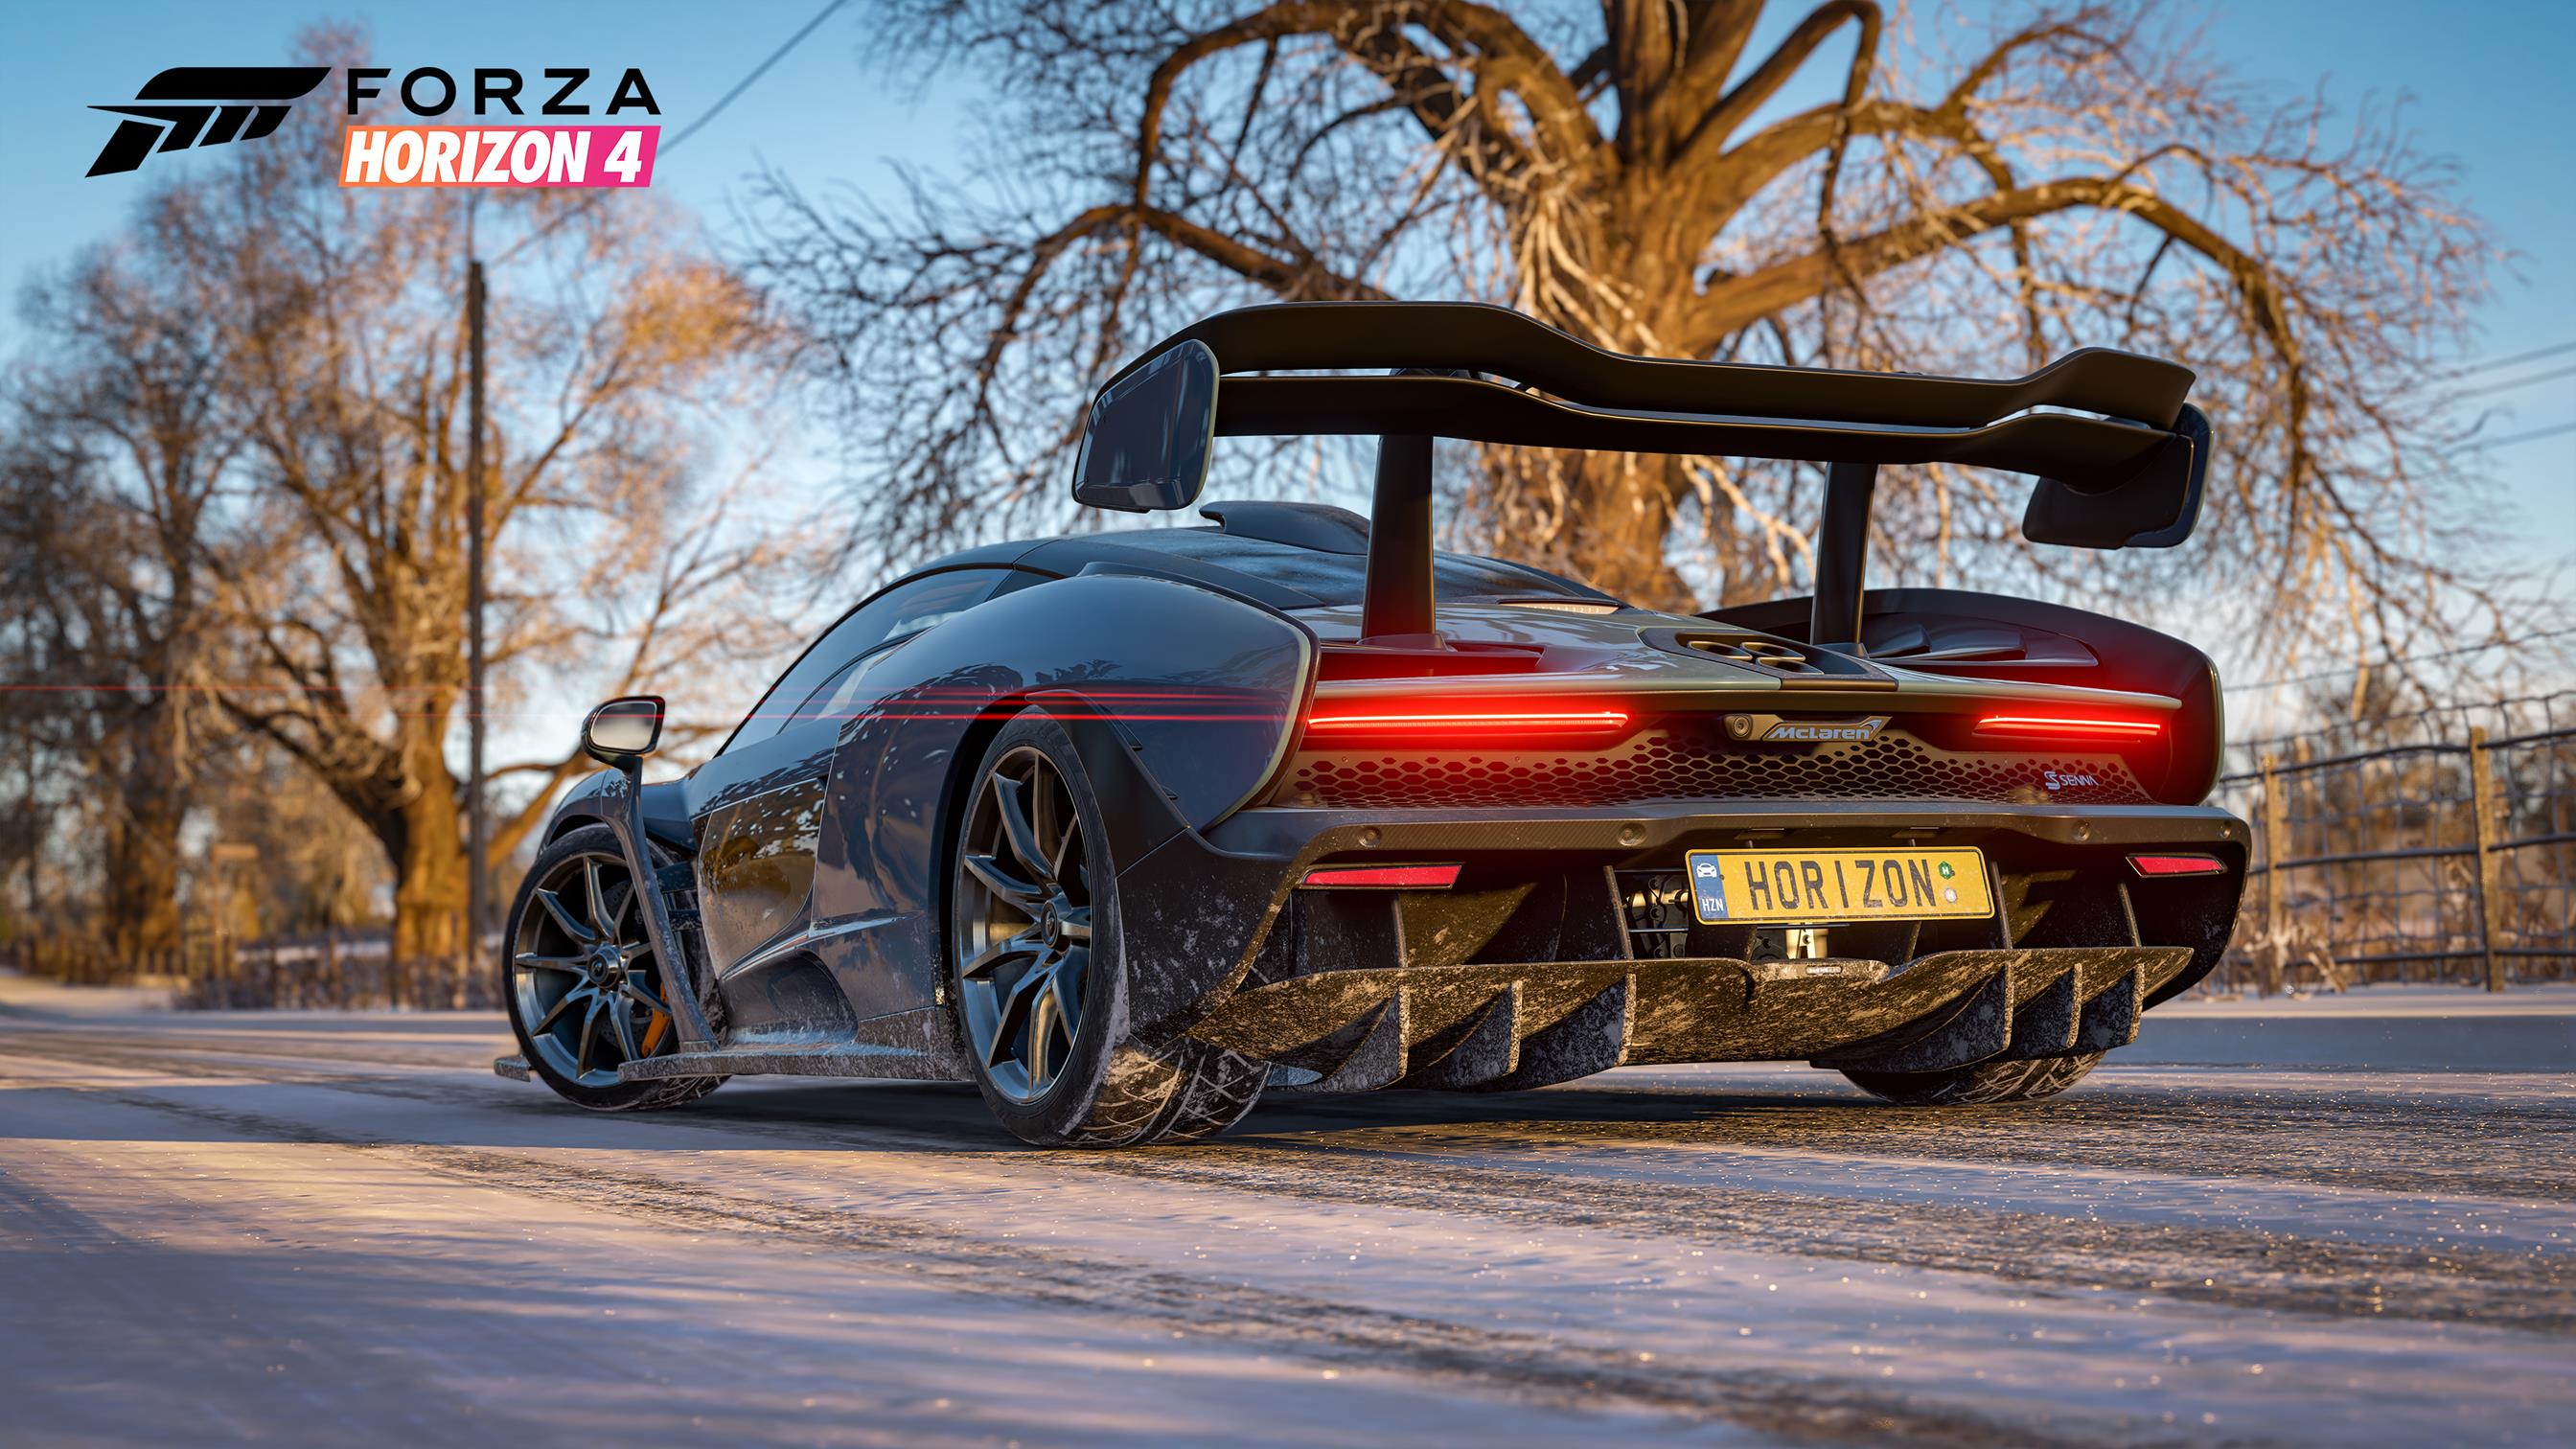 Image for Forza Horizon 4's changing seasons bring big graphical upgrades over its predecessors - report